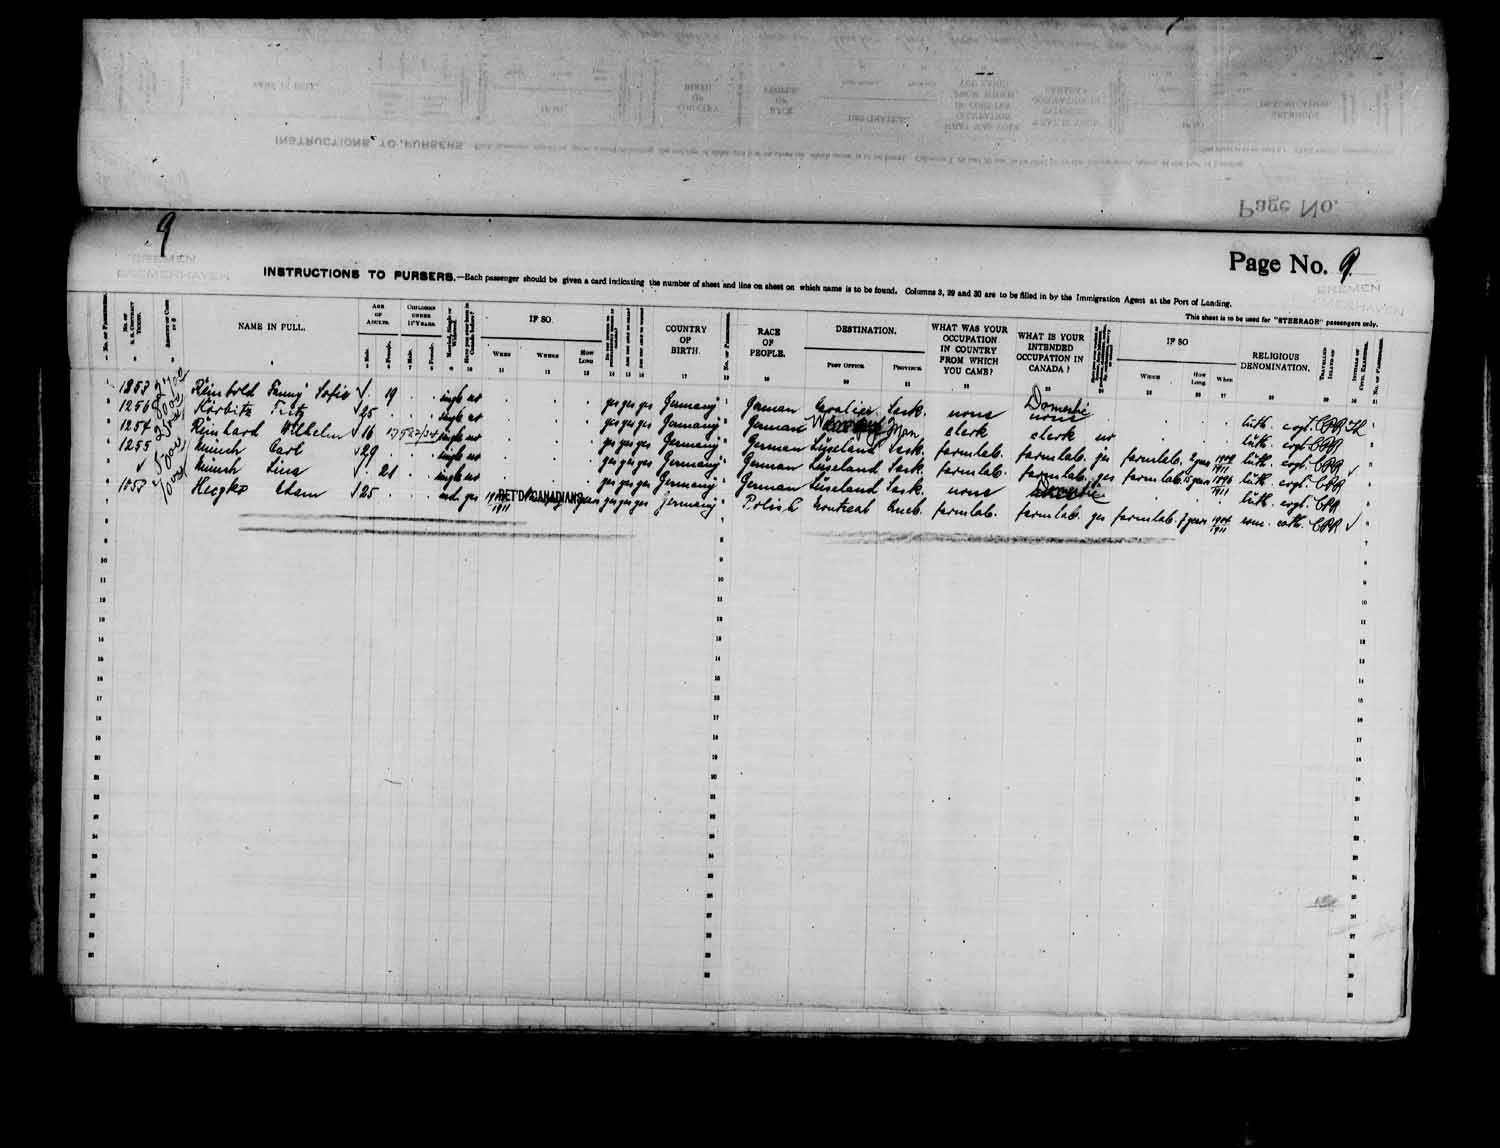 Digitized page of Passenger Lists for Image No.: e003575021